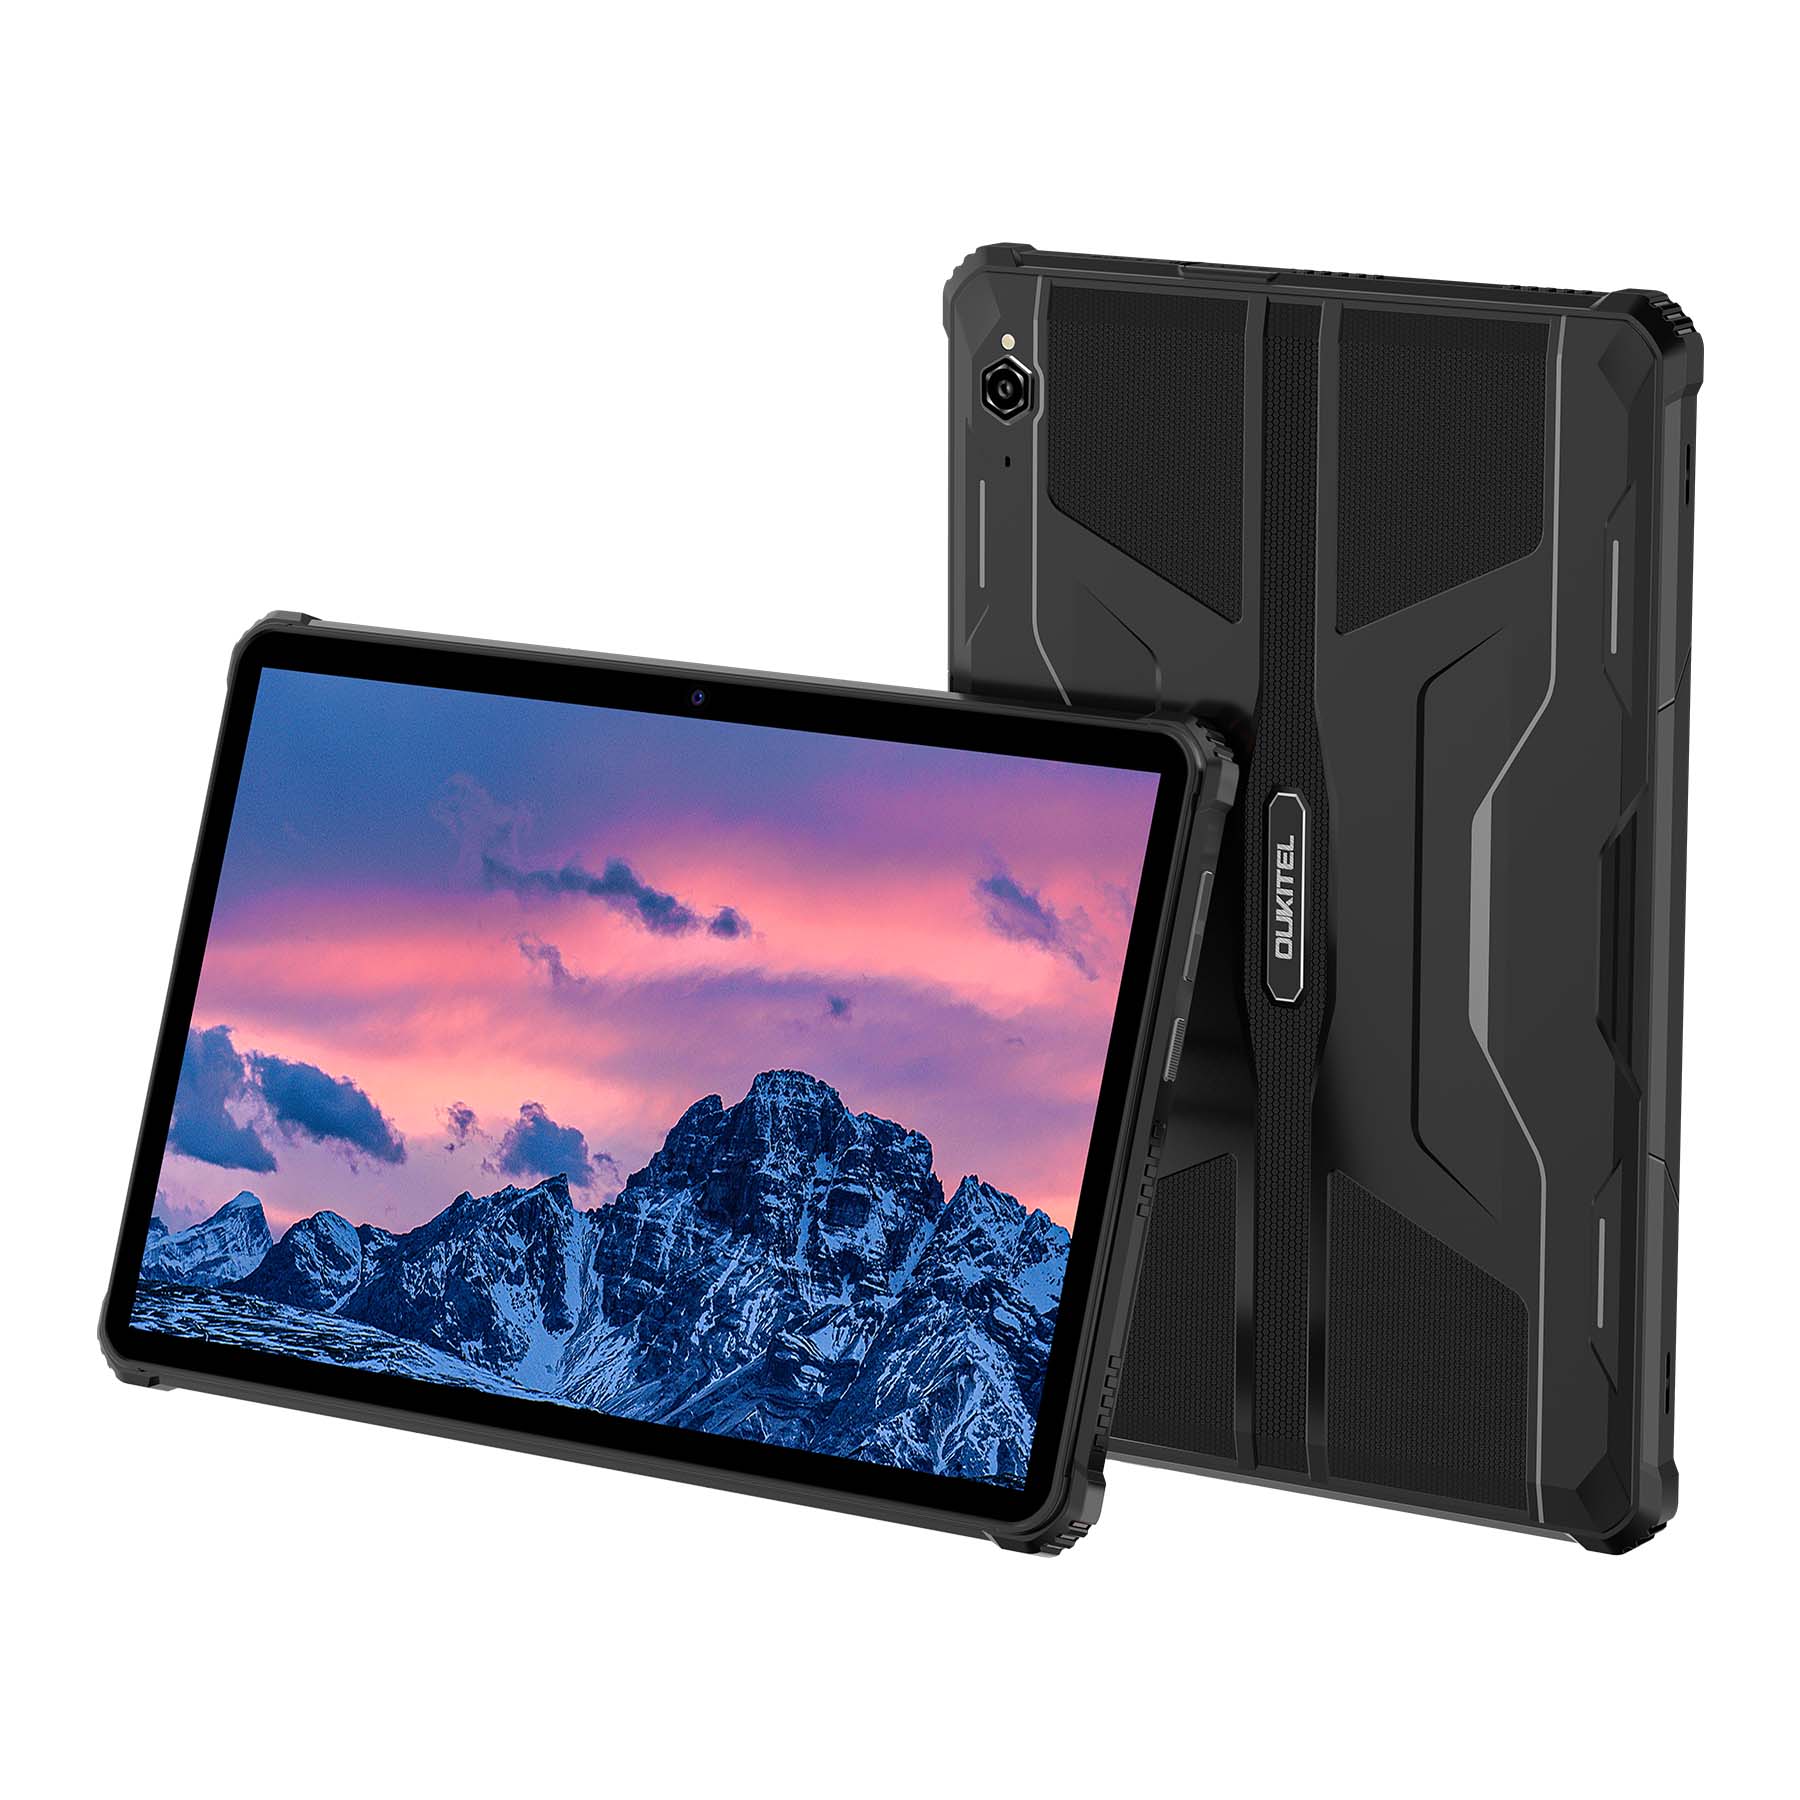 Find OUKITEL RT1 Helio P22 MT8768WA Octa Core 4GB RAM 64GB ROM 4G LTE 10 1 Inch Androd 11 Fingerprint ID Rugged Tablet for Sale on Gipsybee.com